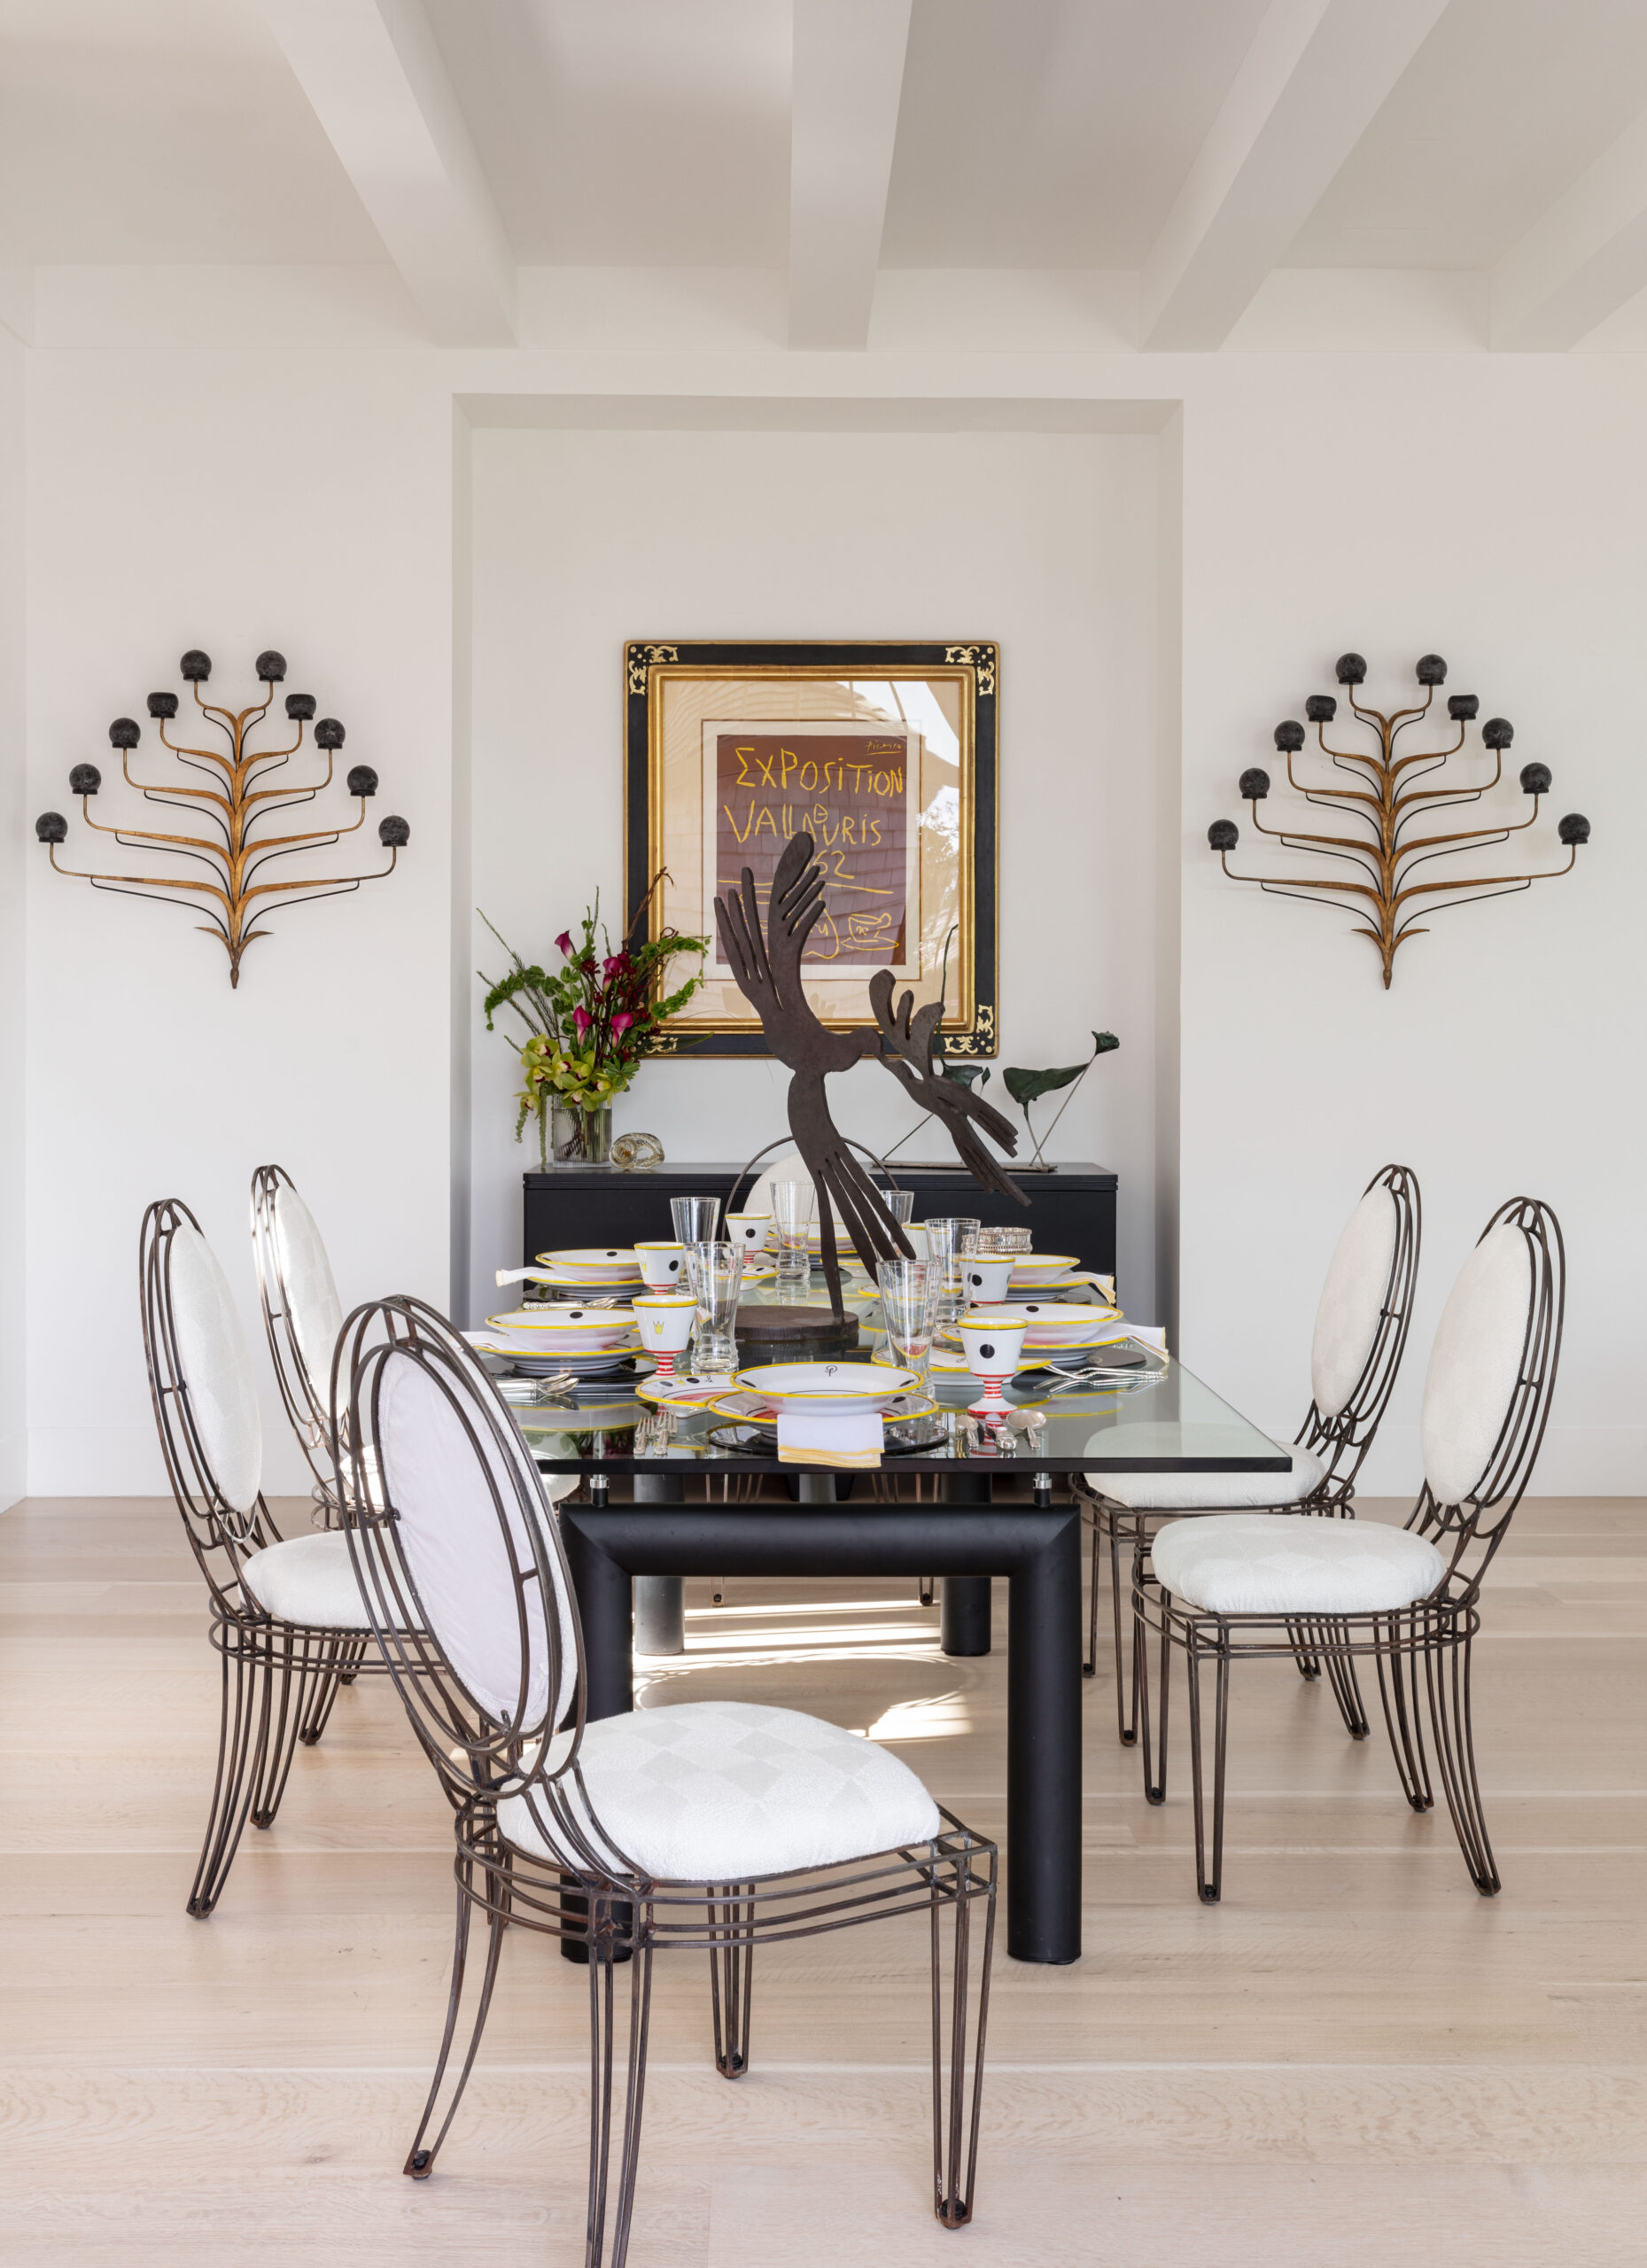 The dining room of Chester and Christy Murray's Quogue home. COURTESY AUSTIN PATTERSON DISSTON